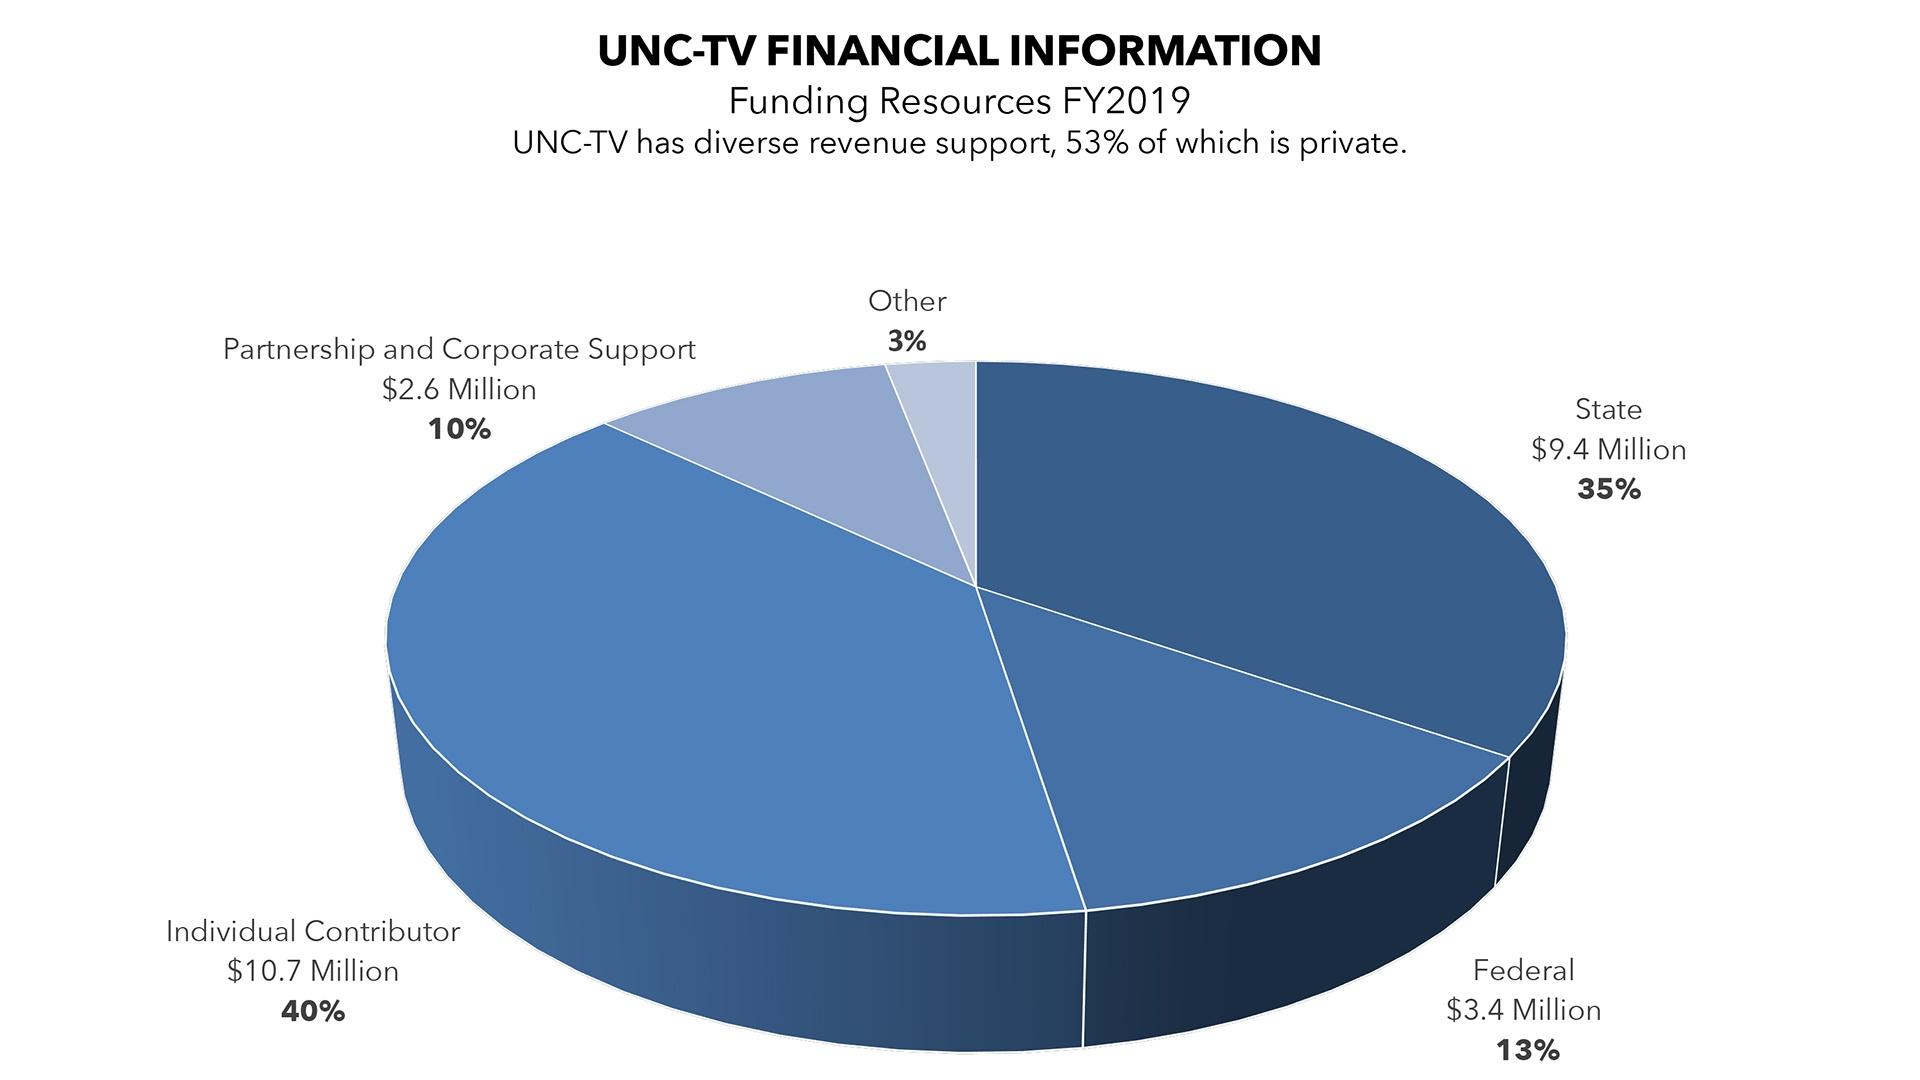 Pie chart of Funding Resources for FY2017: UNC-TV has diverse revenue support, 53% of which is private.